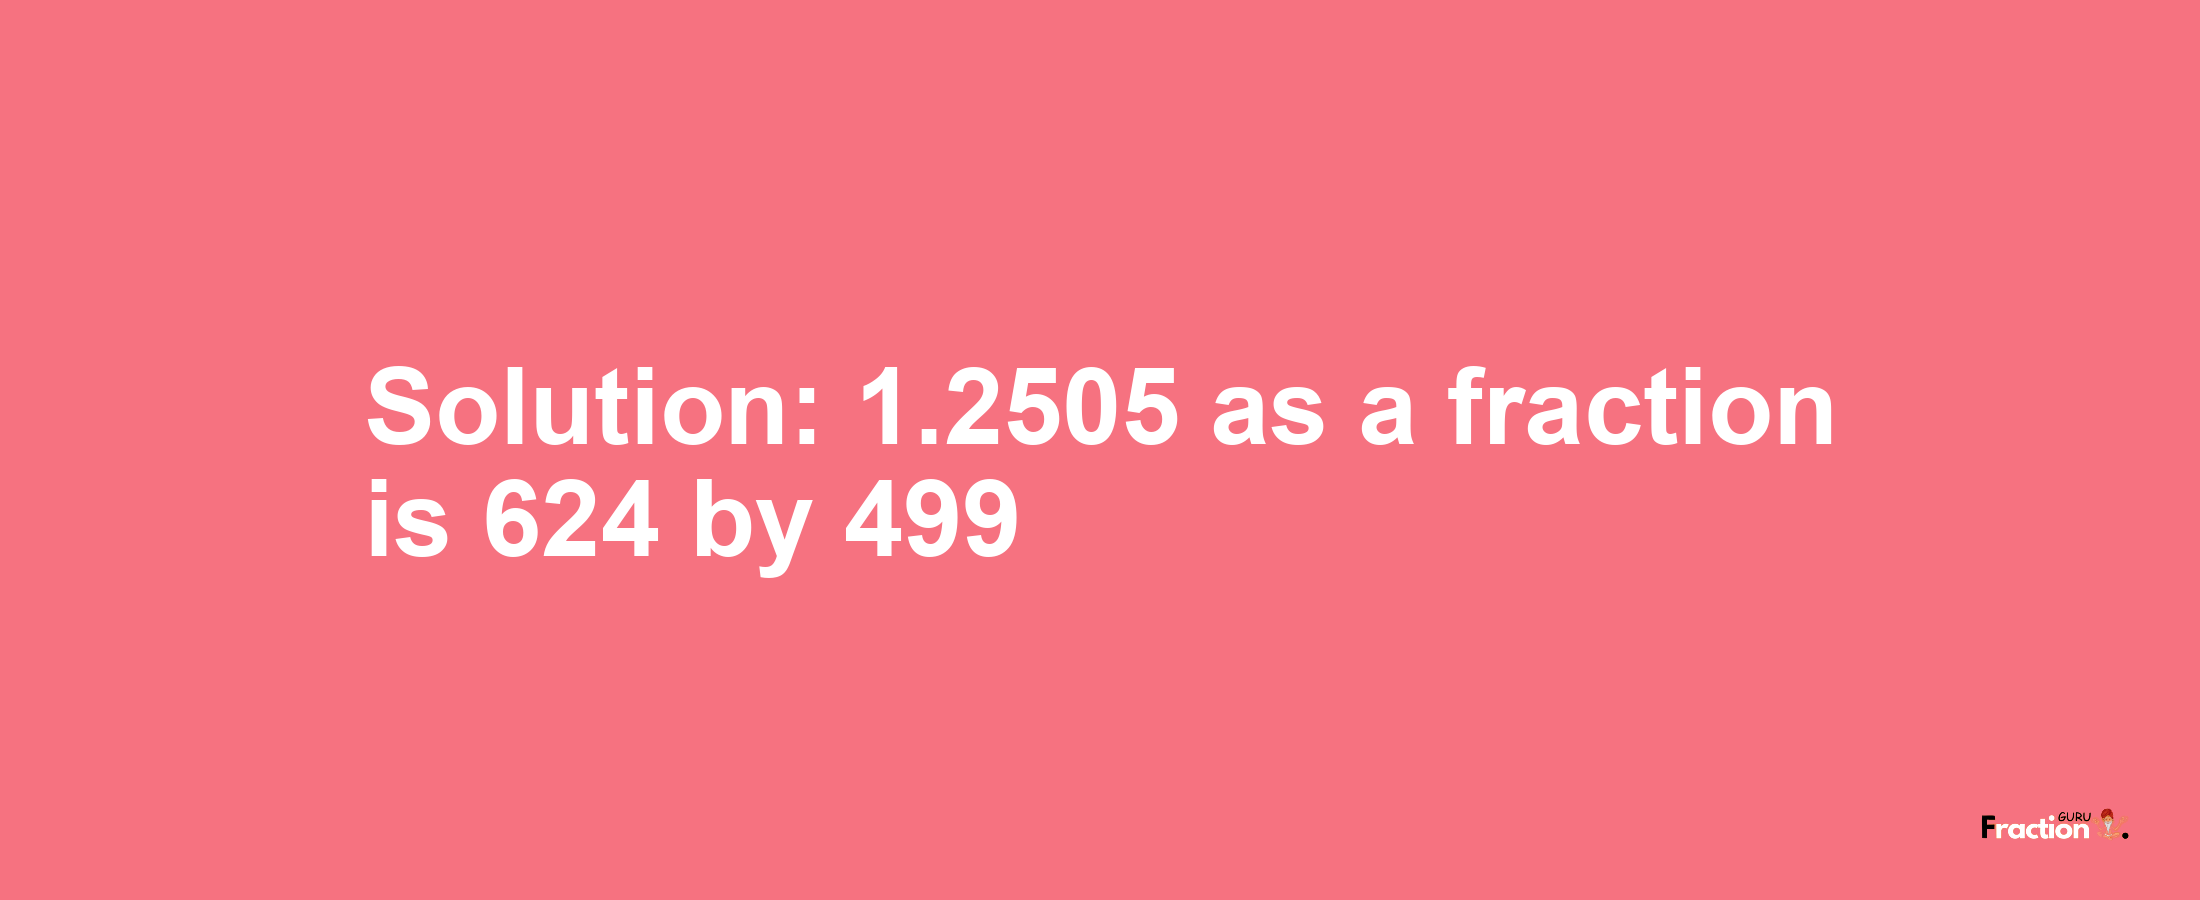 Solution:1.2505 as a fraction is 624/499